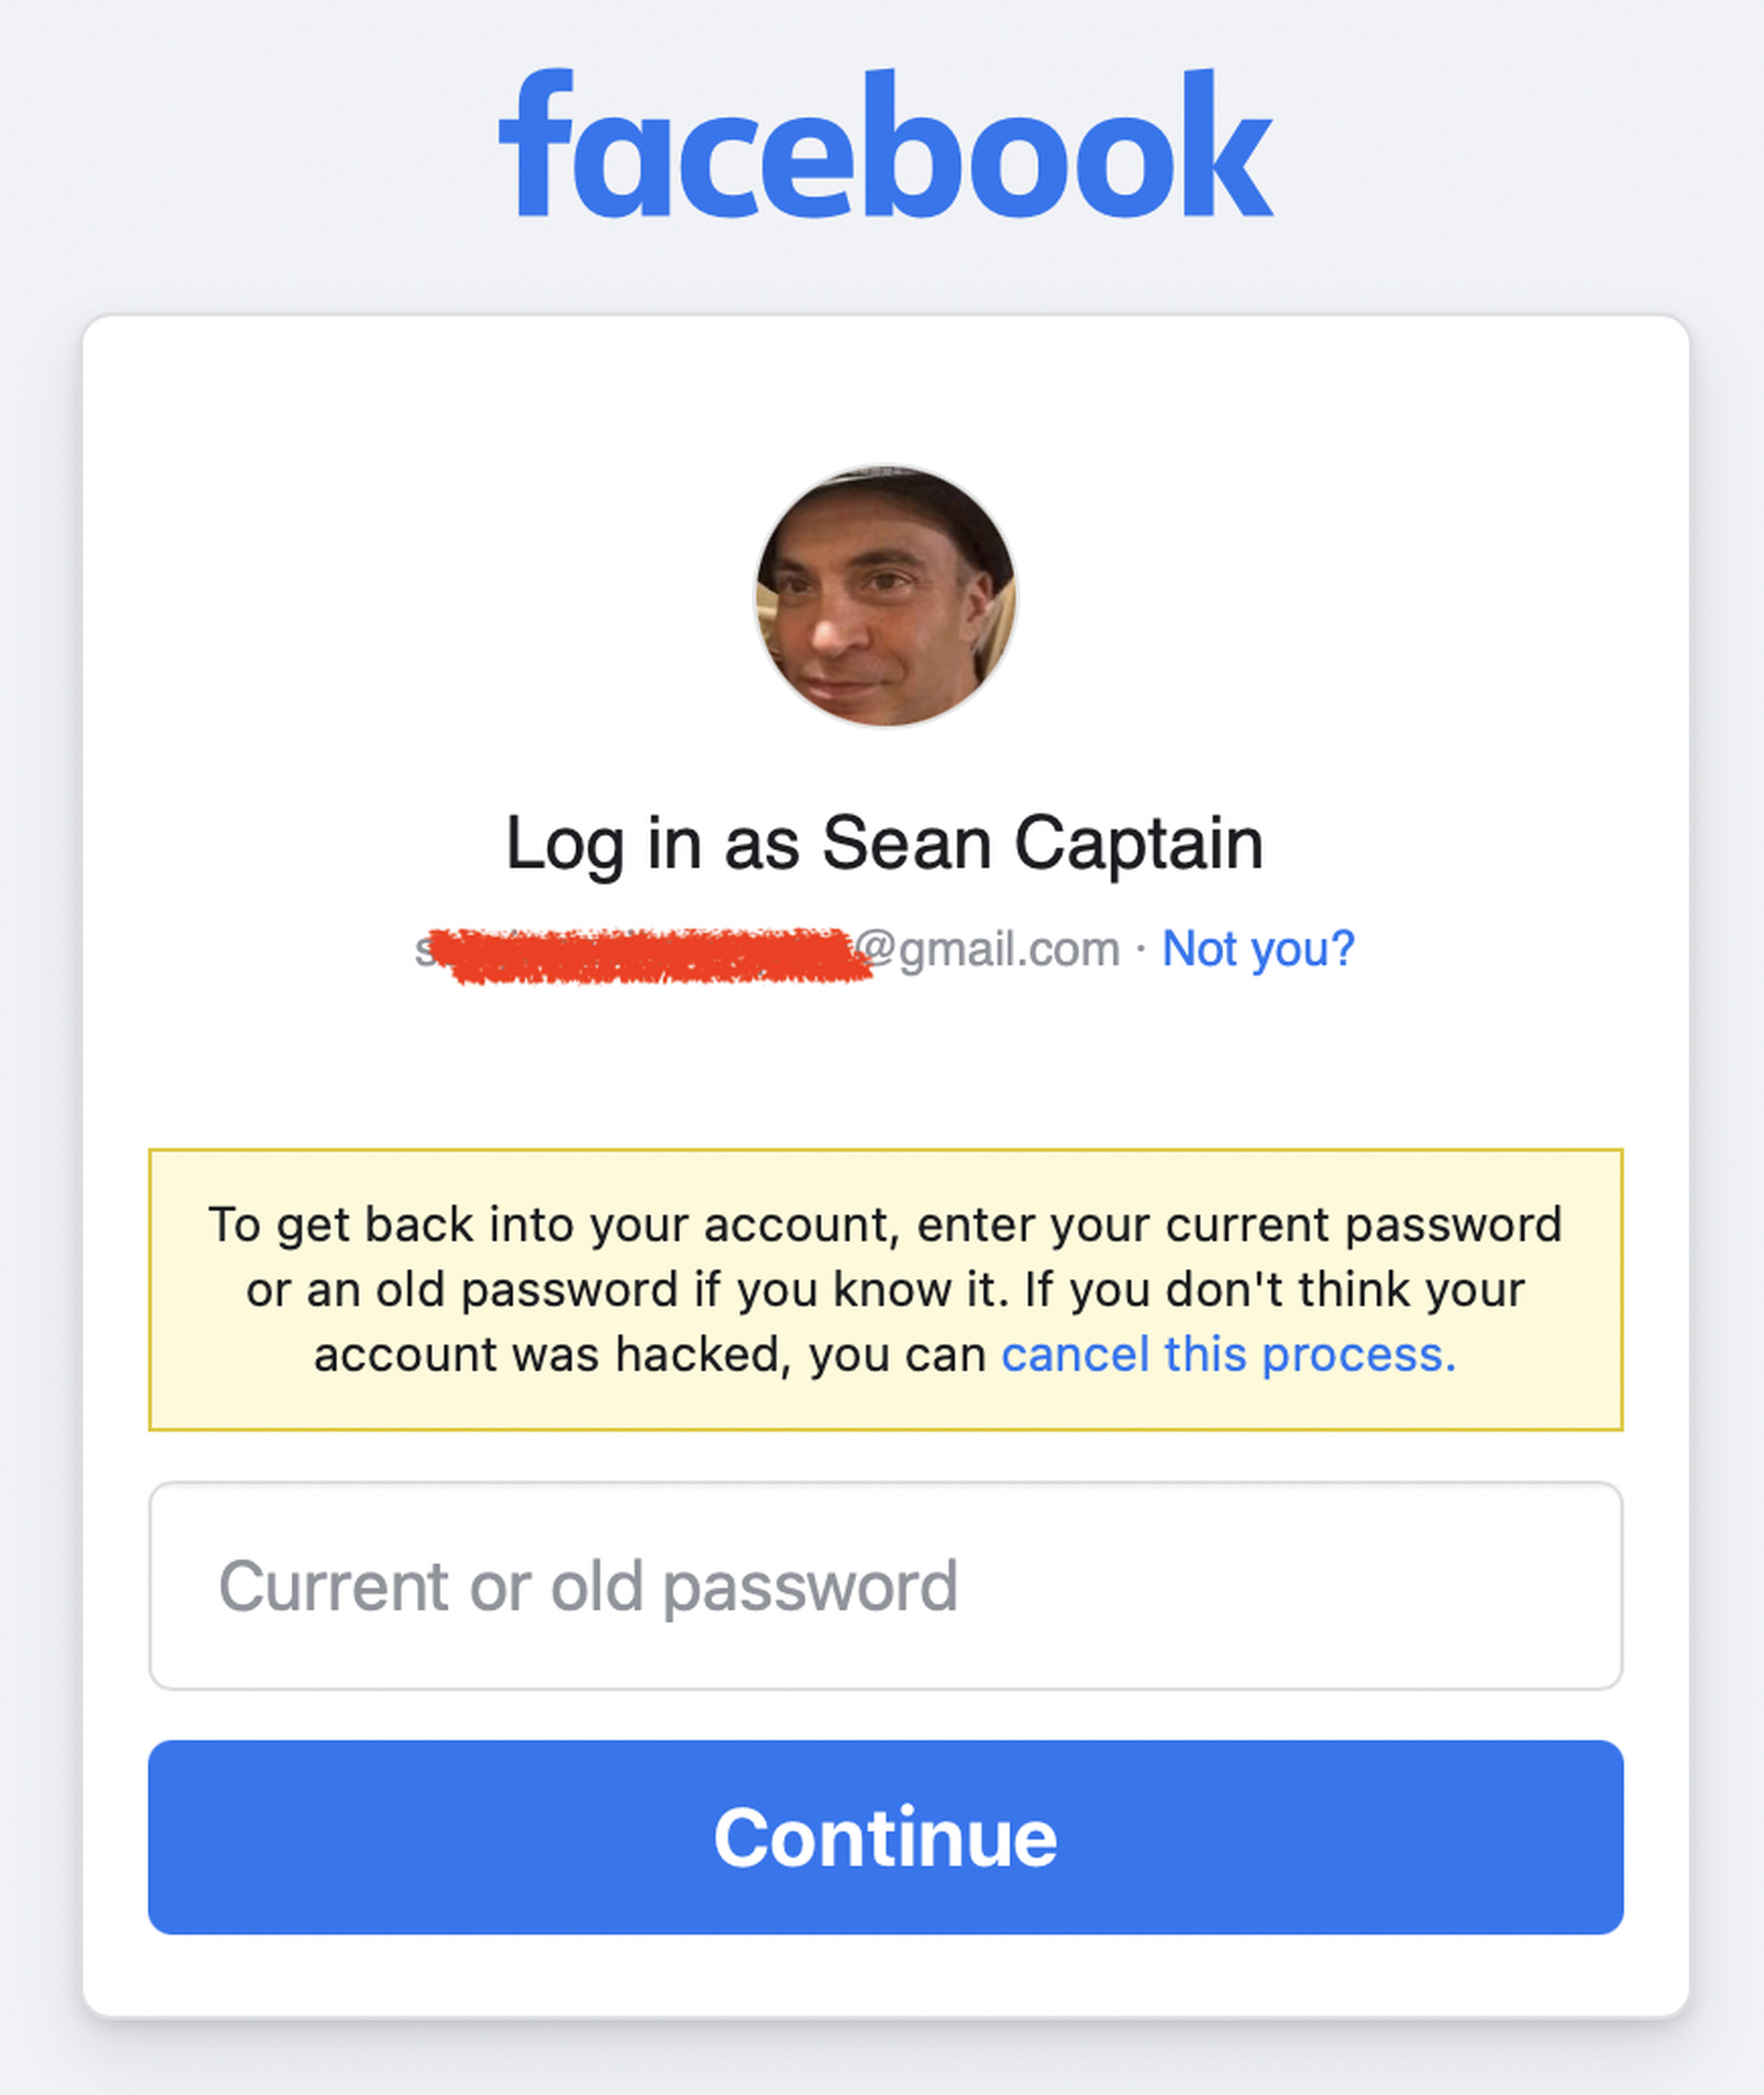 A recent password can help you regain control of your Facebook account, even if it’s not still in use.